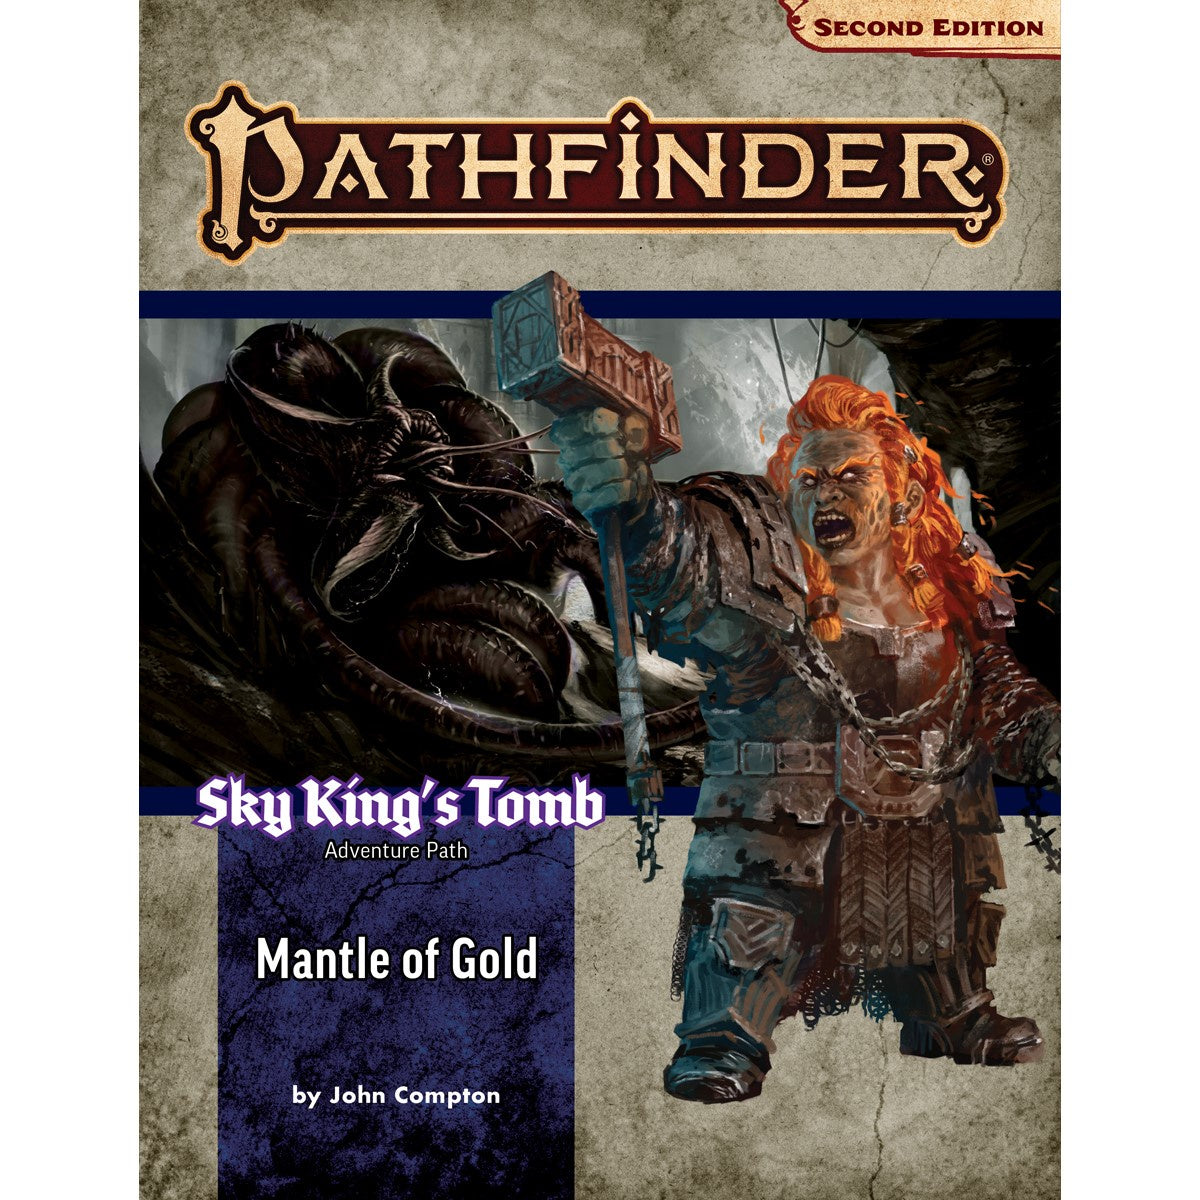 Pathfinder Second Edition Adventure Path: Sky Kings Tomb #1 Mantle of Gold